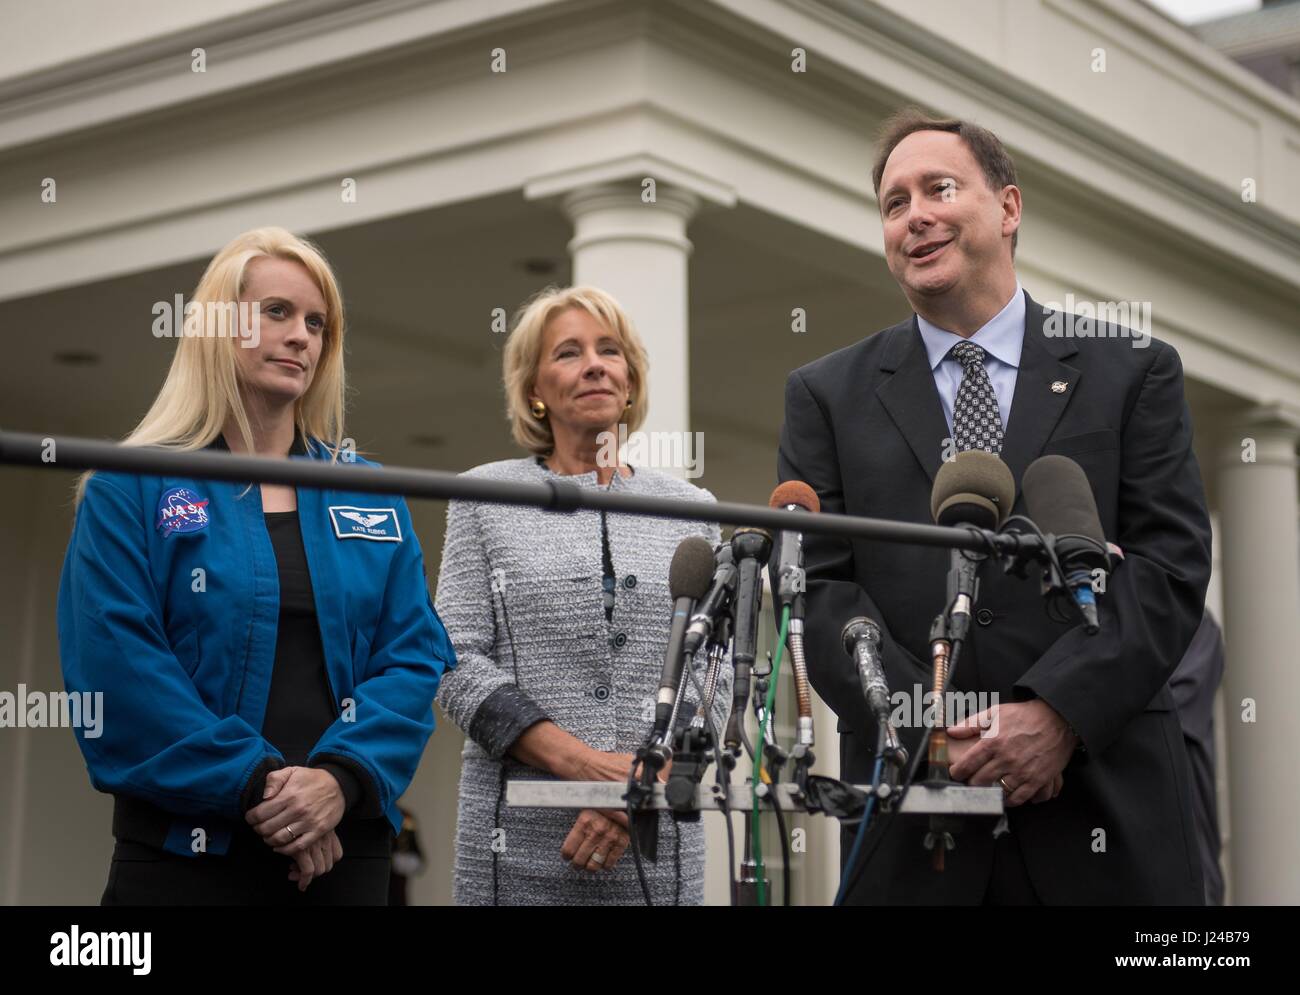 Houston, USA. 24th Apr, 2017. Acting NASA Administrator Robert Lightfoot, along with Secretary of Education Betsy DeVos, center, and NASA astronaut Kate Rubins, speaks to reporters outside of the West Wing of the White House shortly after President Donald Trump, Ivanka Trump, and Rubins, spoke with astronauts Peggy Whitson and Jack Fischer onboard the International Space Station April 24, 2017 in Washington, DC. Trump congratulated Whitson for breaking the record for cumulative time spent in space by a U.S. astronaut. Credit: Planetpix/Alamy Live News Stock Photo